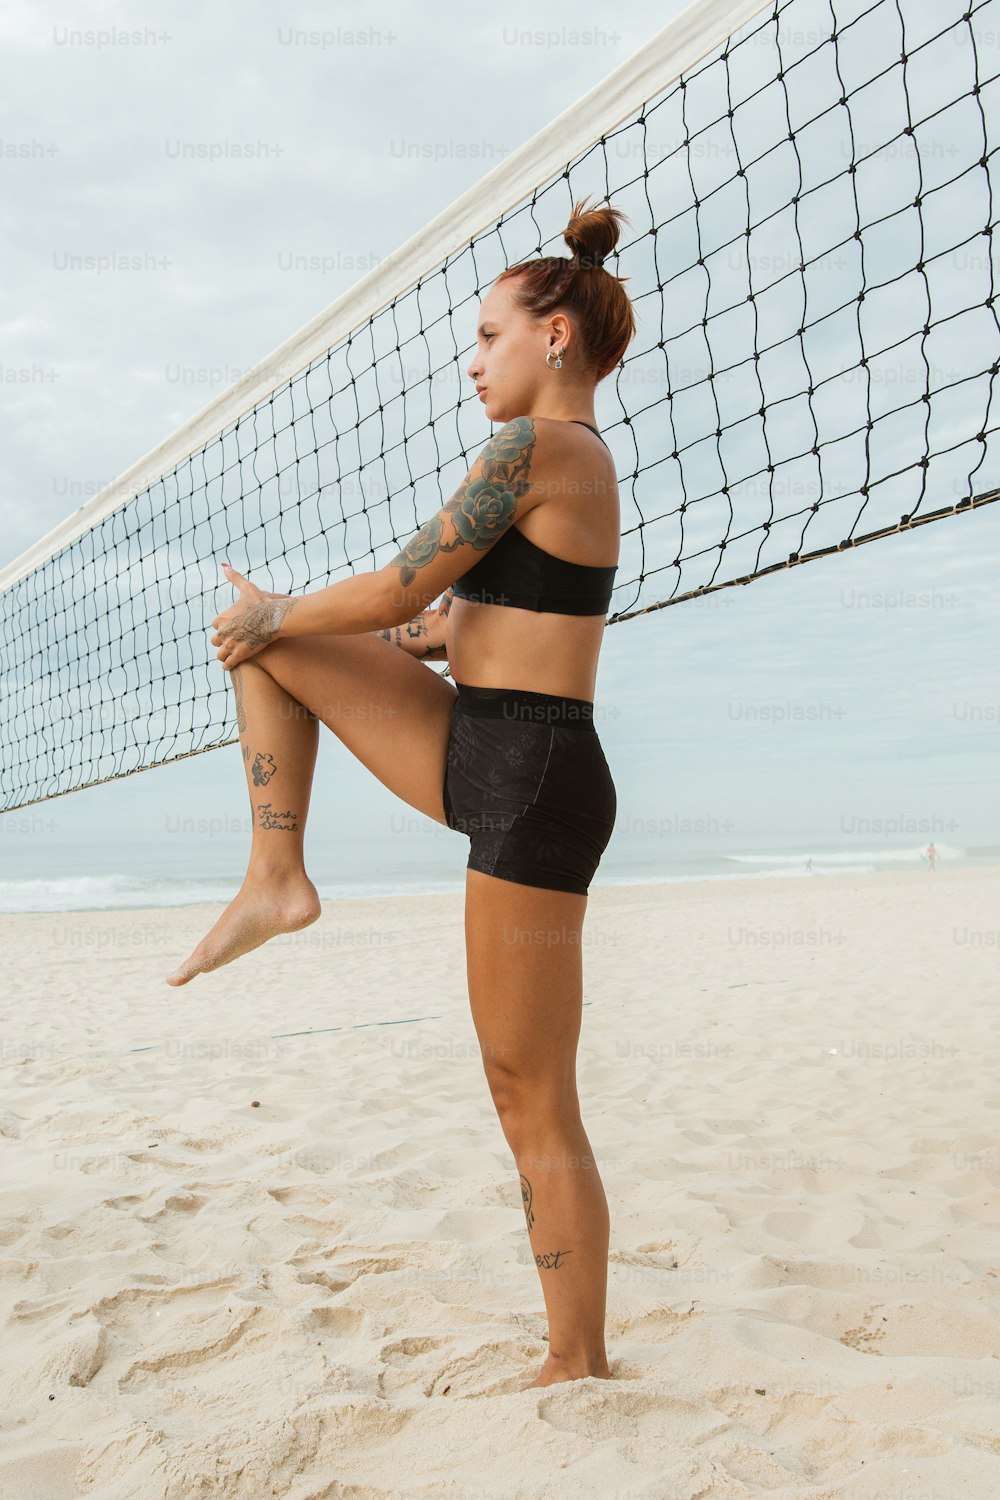 a woman standing on a beach next to a volleyball net